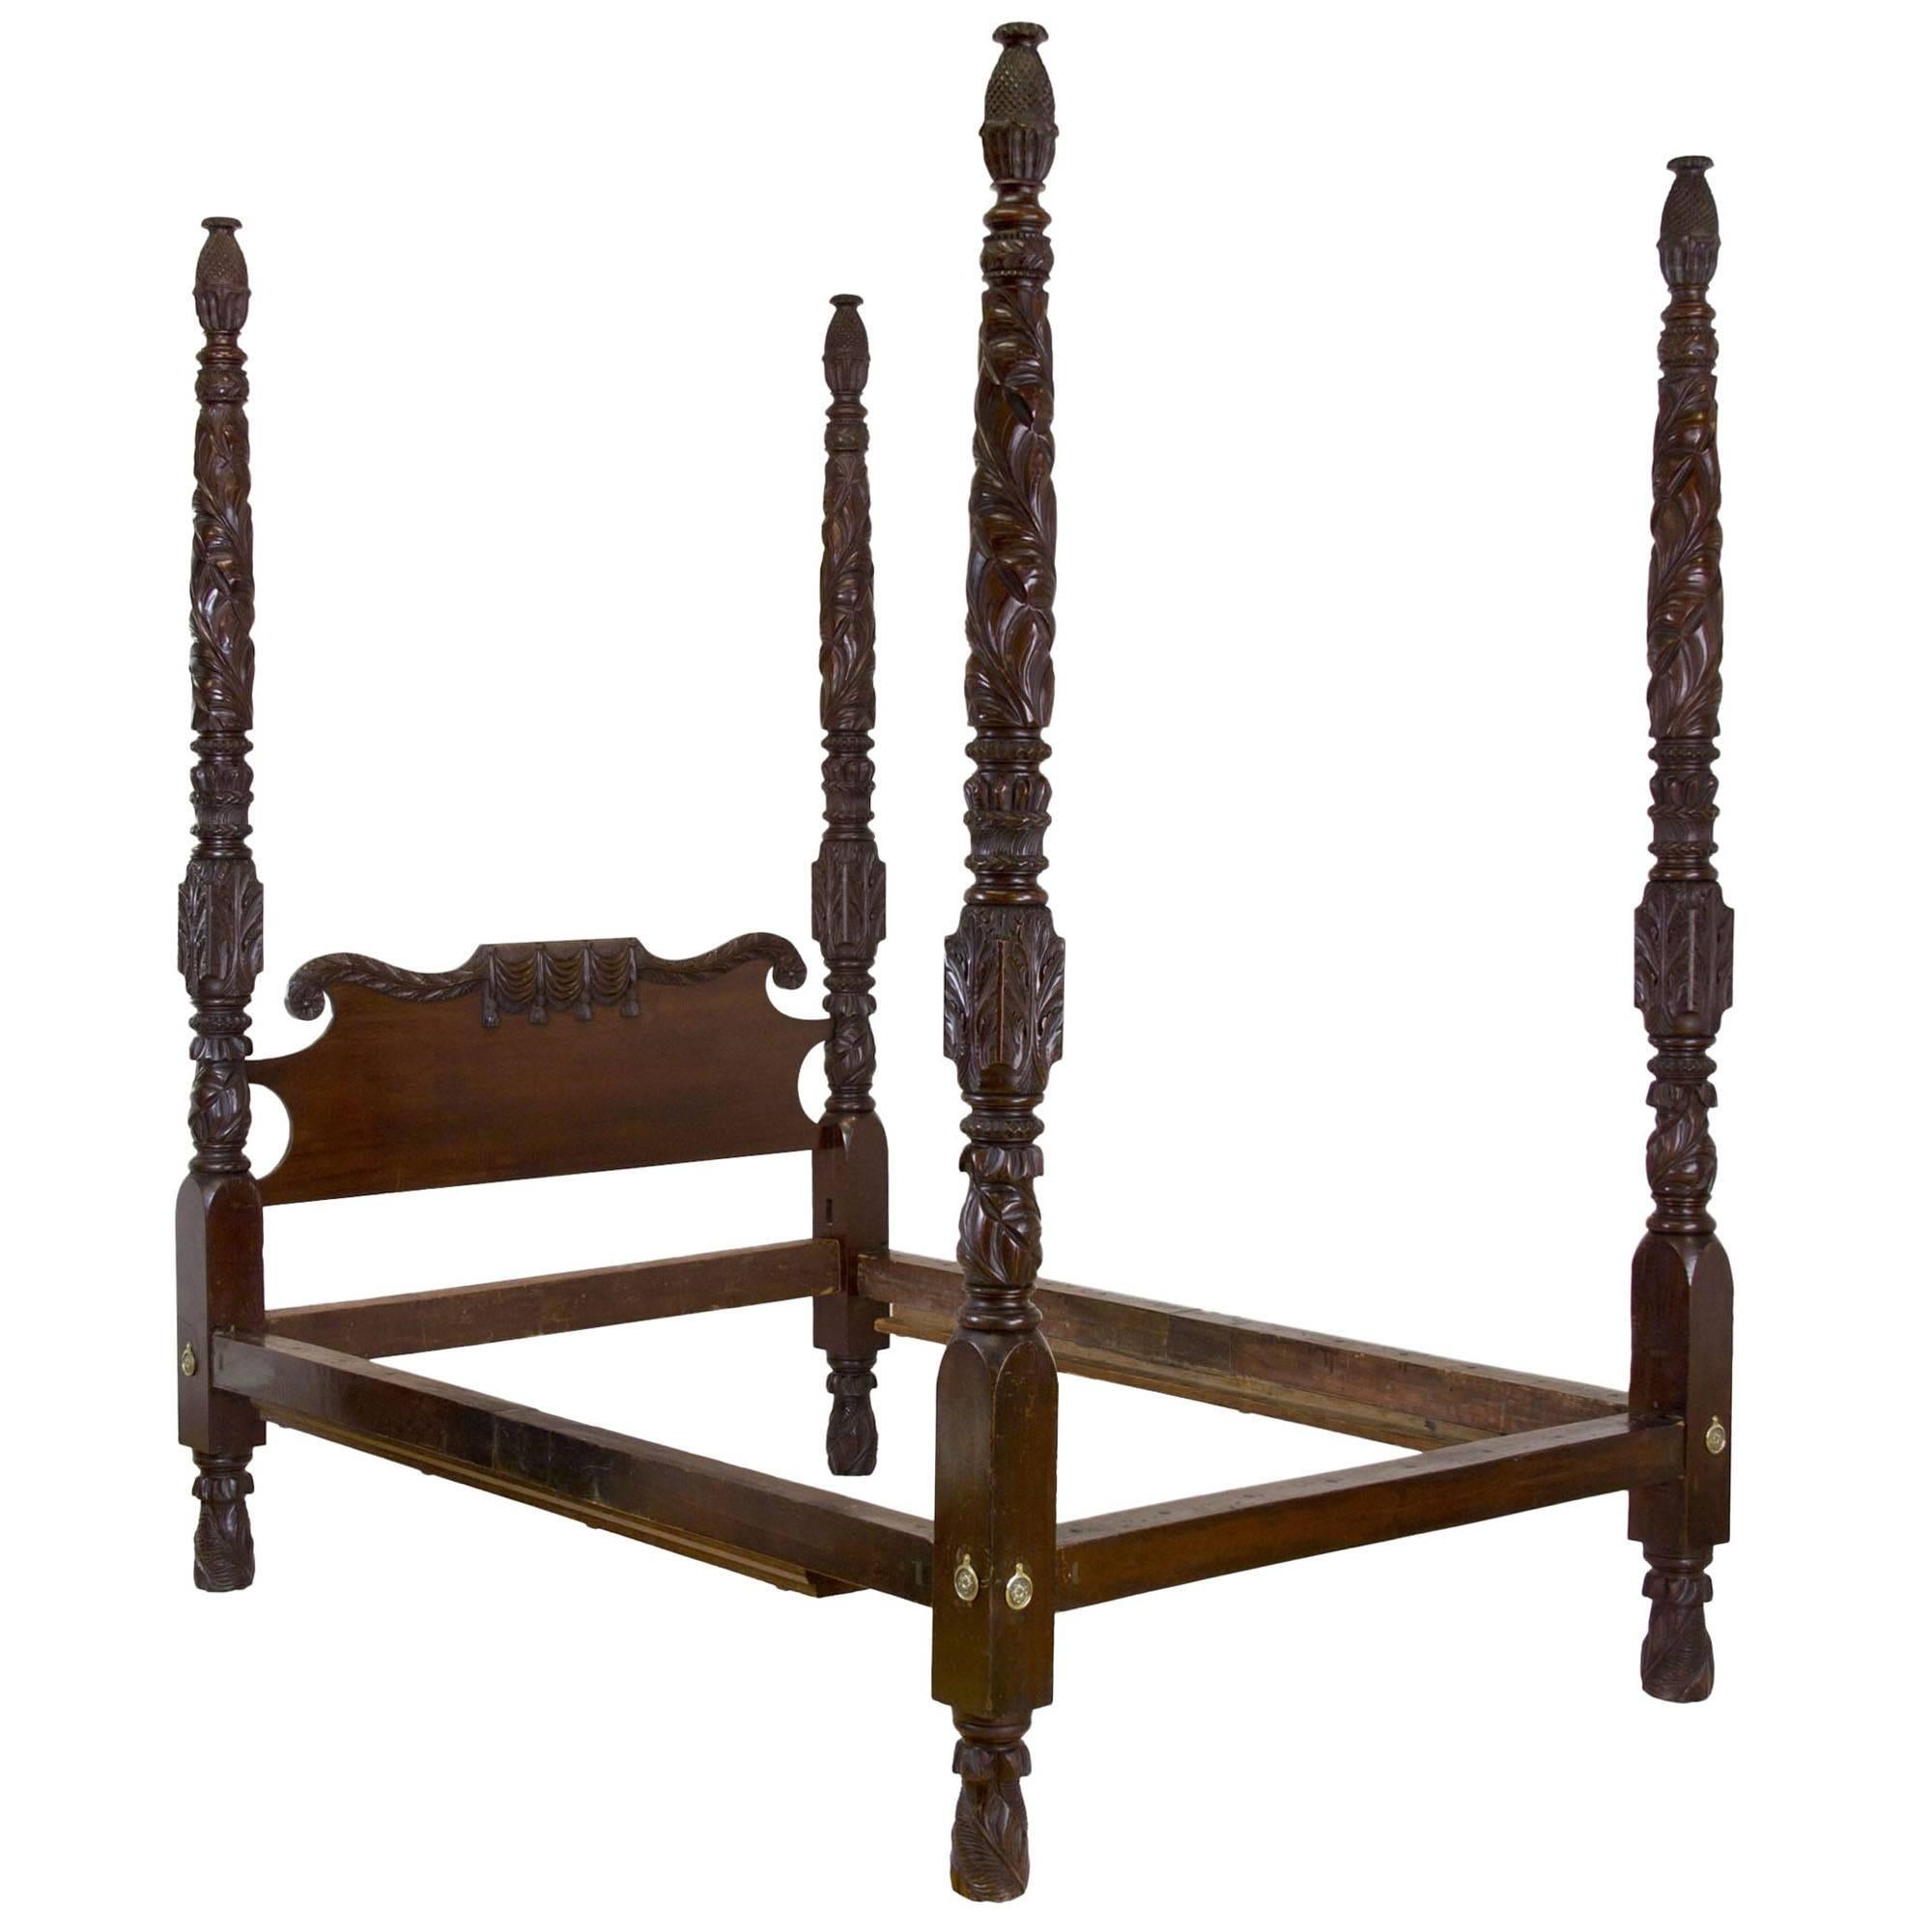 Highly Carved Classical Mahogany Four Poster Bed, Massachusetts, circa 1820